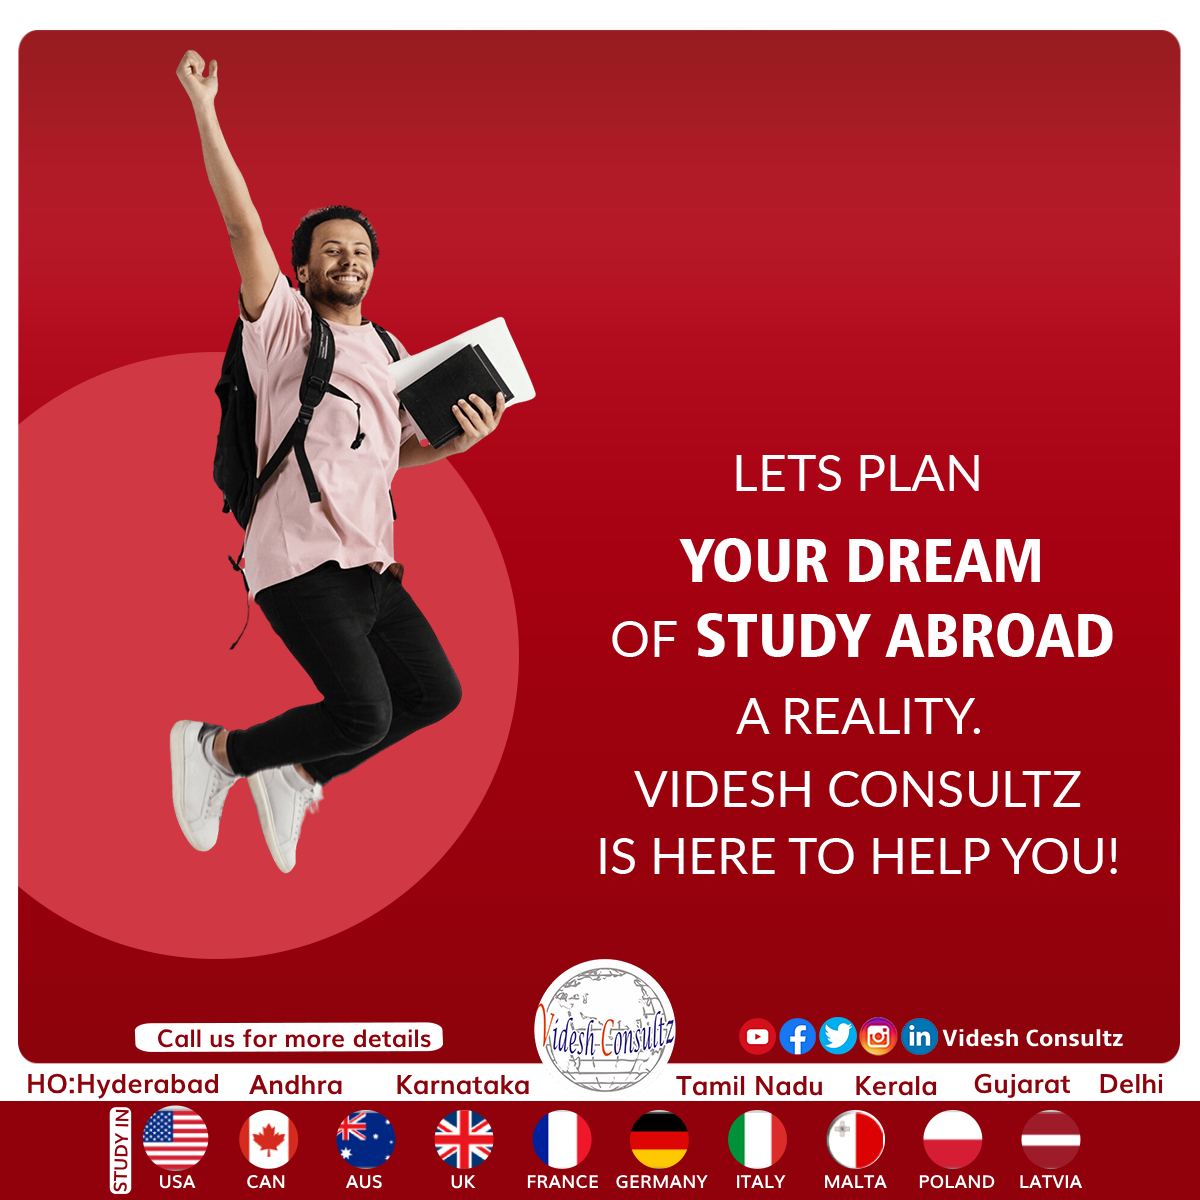 Here you go! Applications are open in 2024 and you will be the first to reach your dream abroad education.
#studyabroad #studyeurope #videshconsultz #overseaseduation #topuniversities #studenvisa

Visit us at: videshconsultz.com